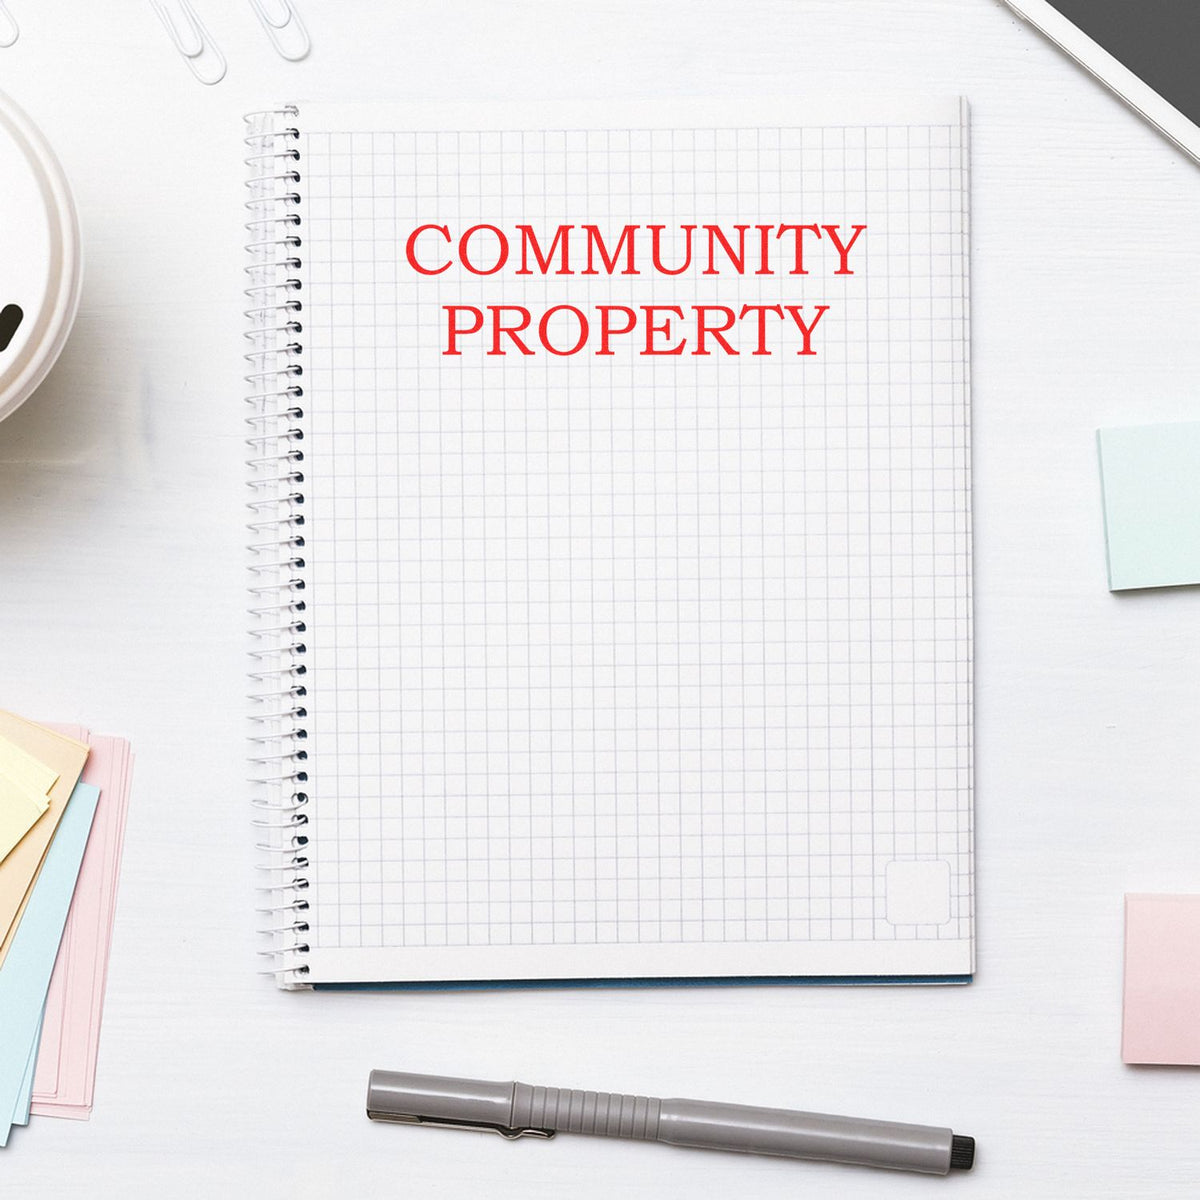 Self-Inking Community Property Stamp In Use Photo